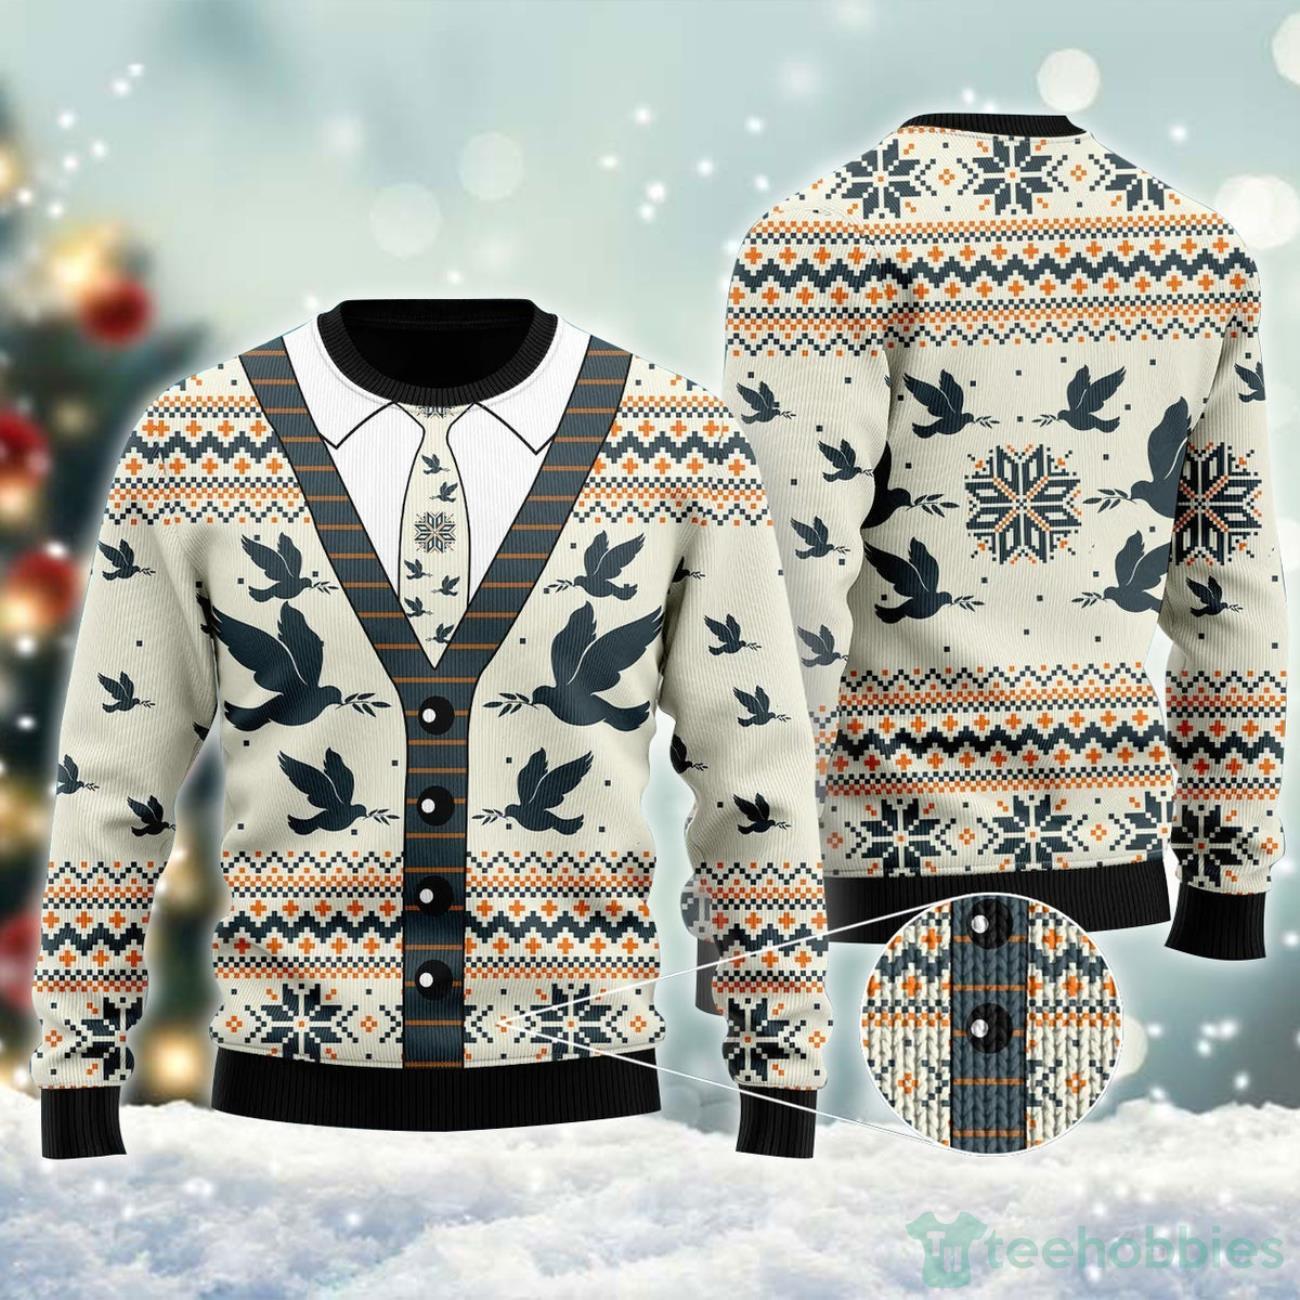 A Silhouette Of Flying Pigeon Cardigan Ugly Sweater For Christmas Product Photo 1